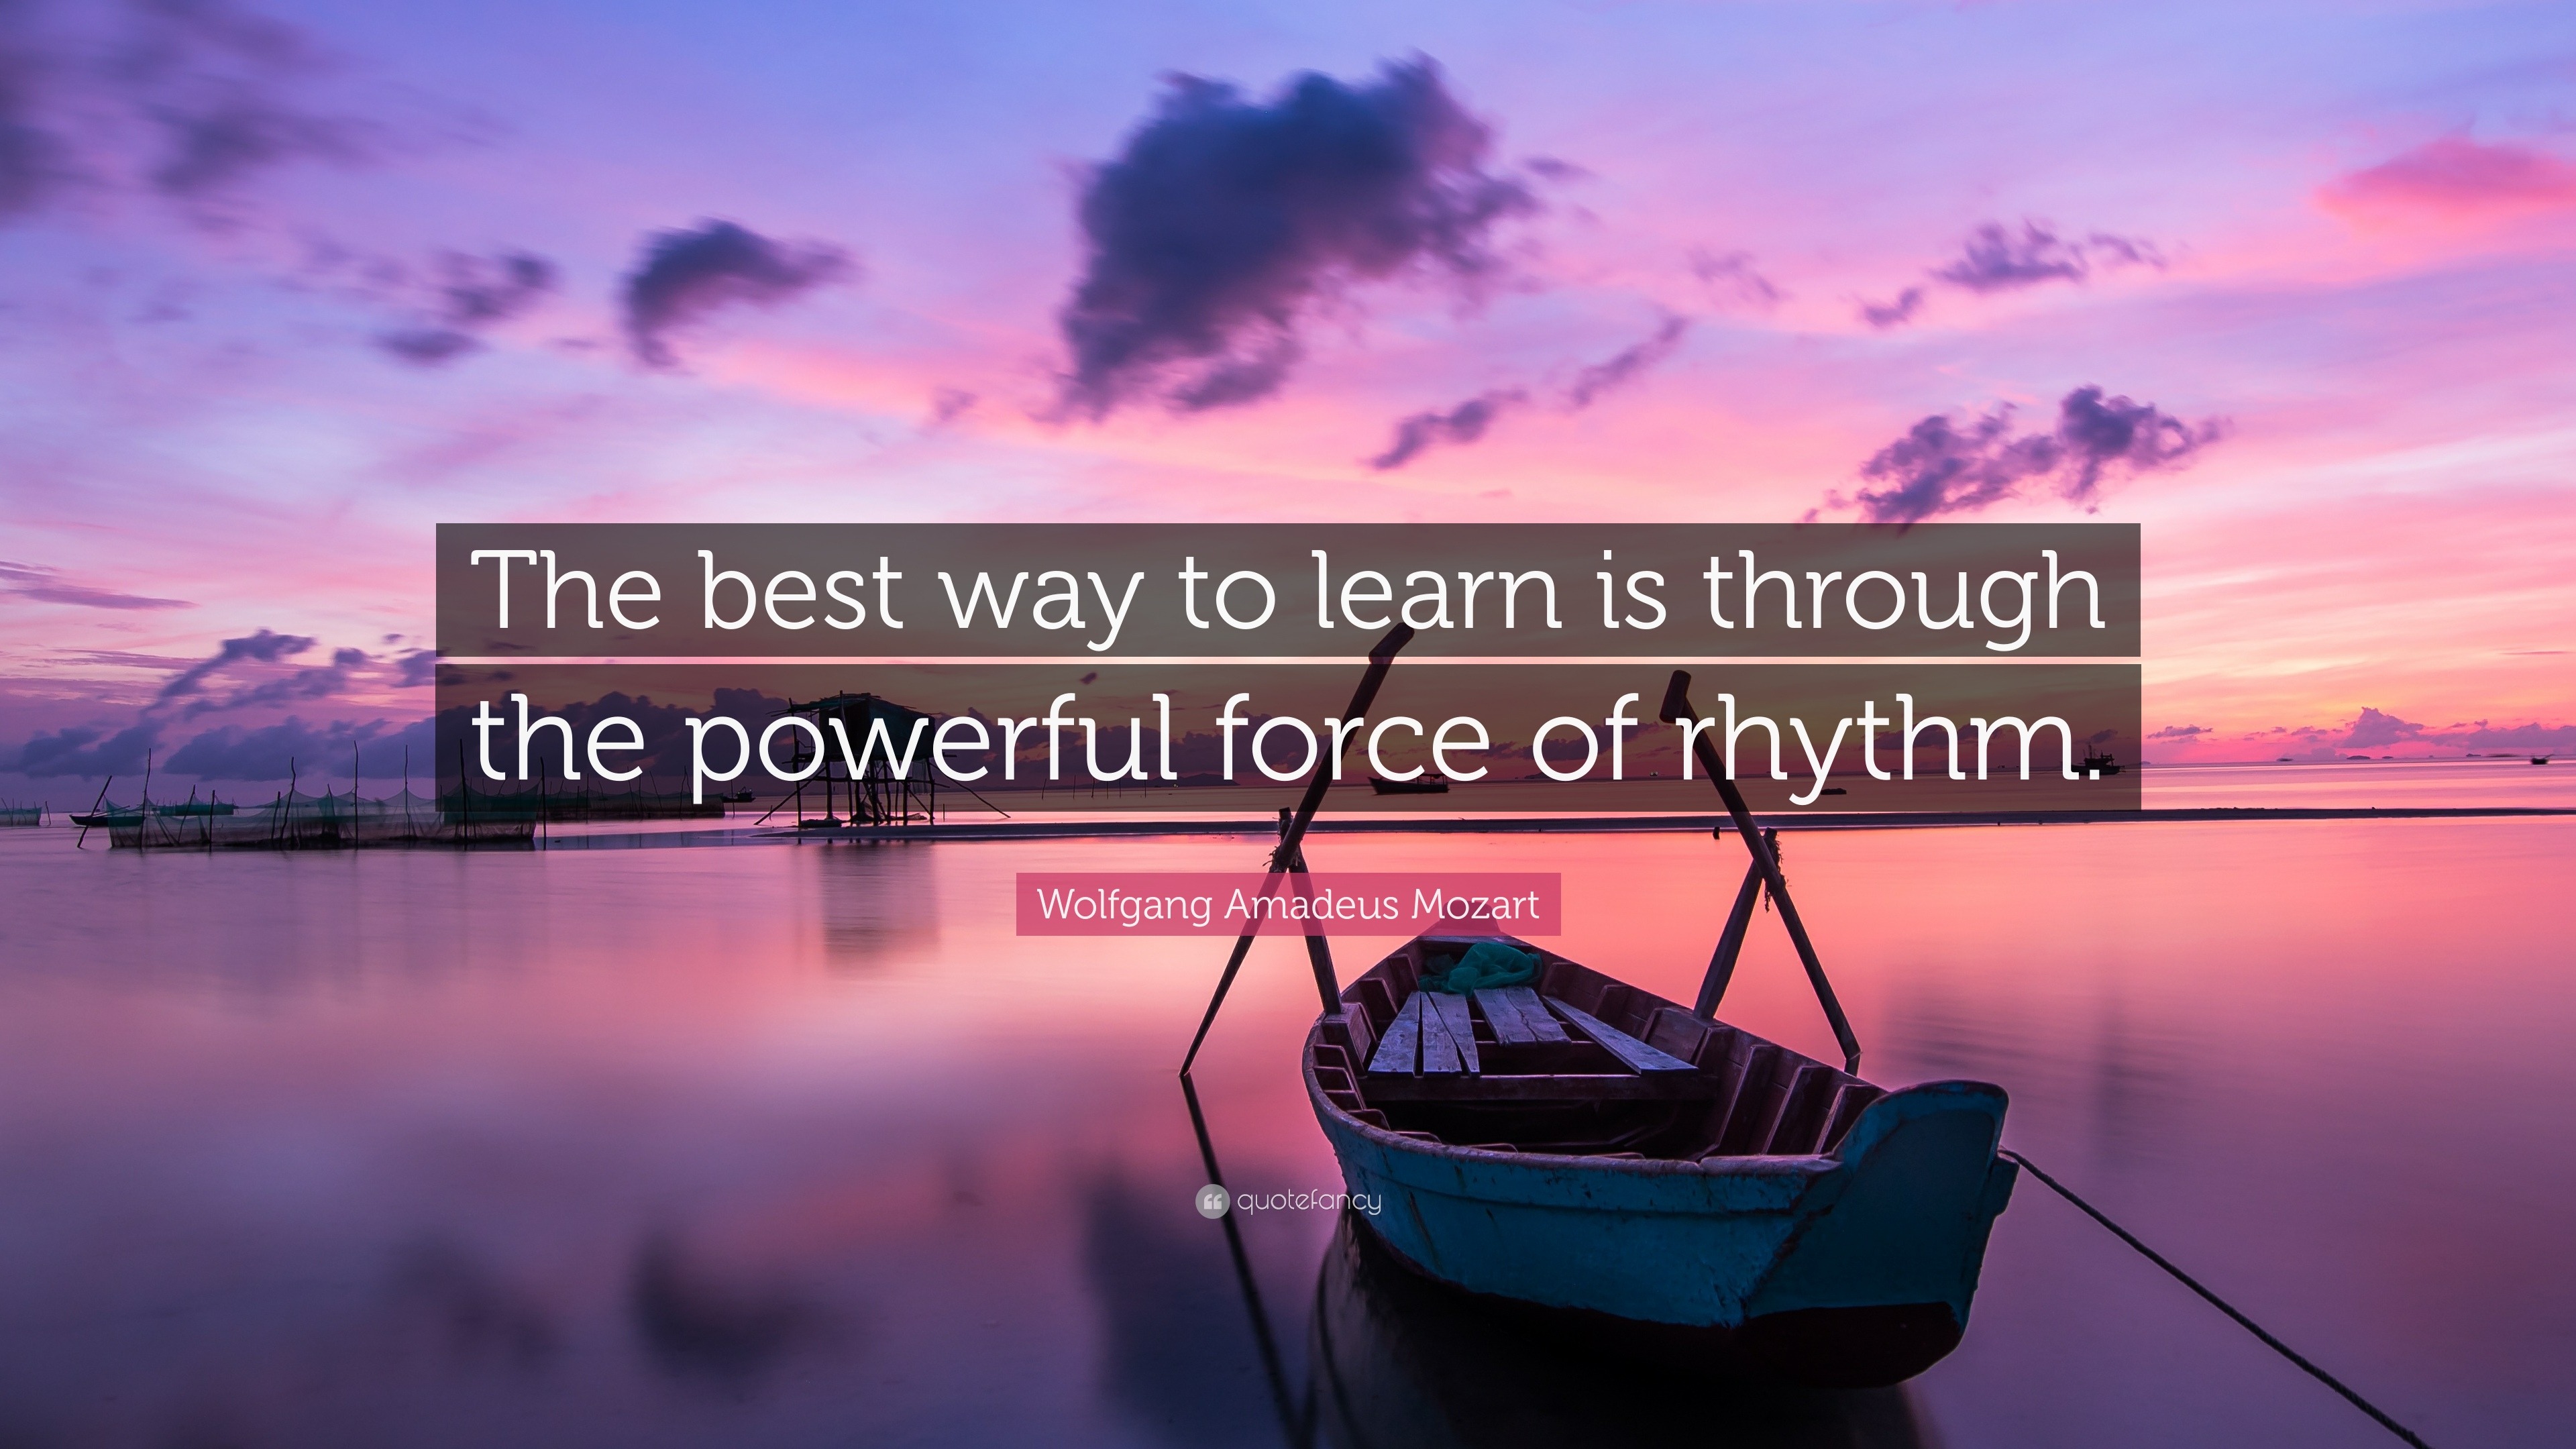 Wolfgang Amadeus Mozart Quote: “The best way to learn is through the ...